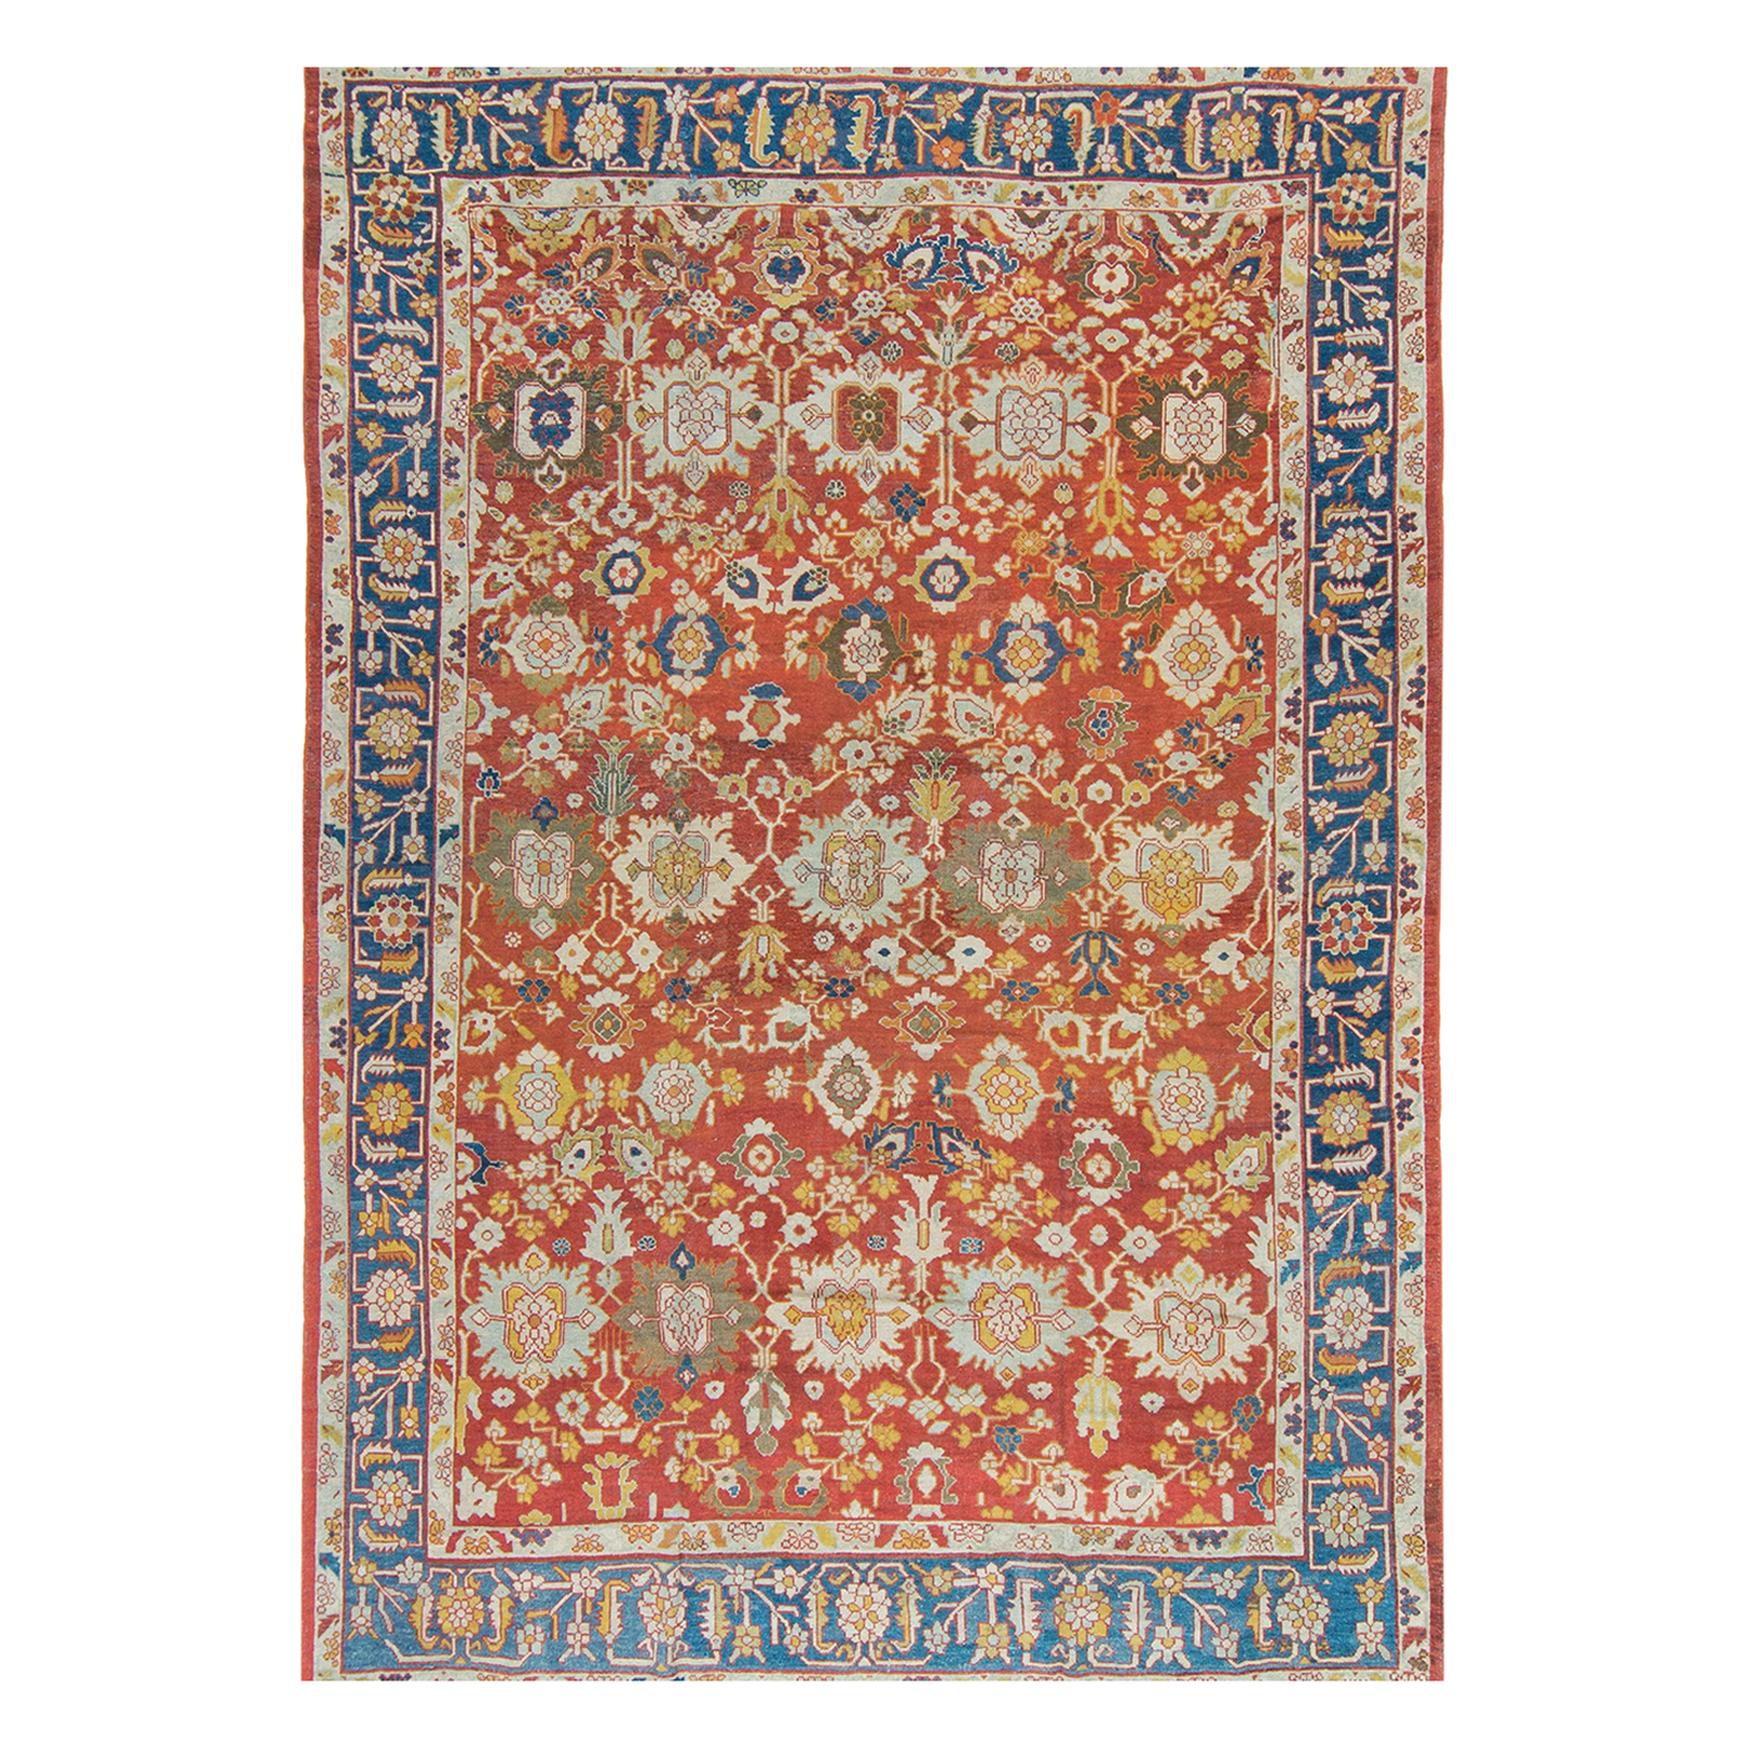 Antique Persian Mahal Sultanabad Rug